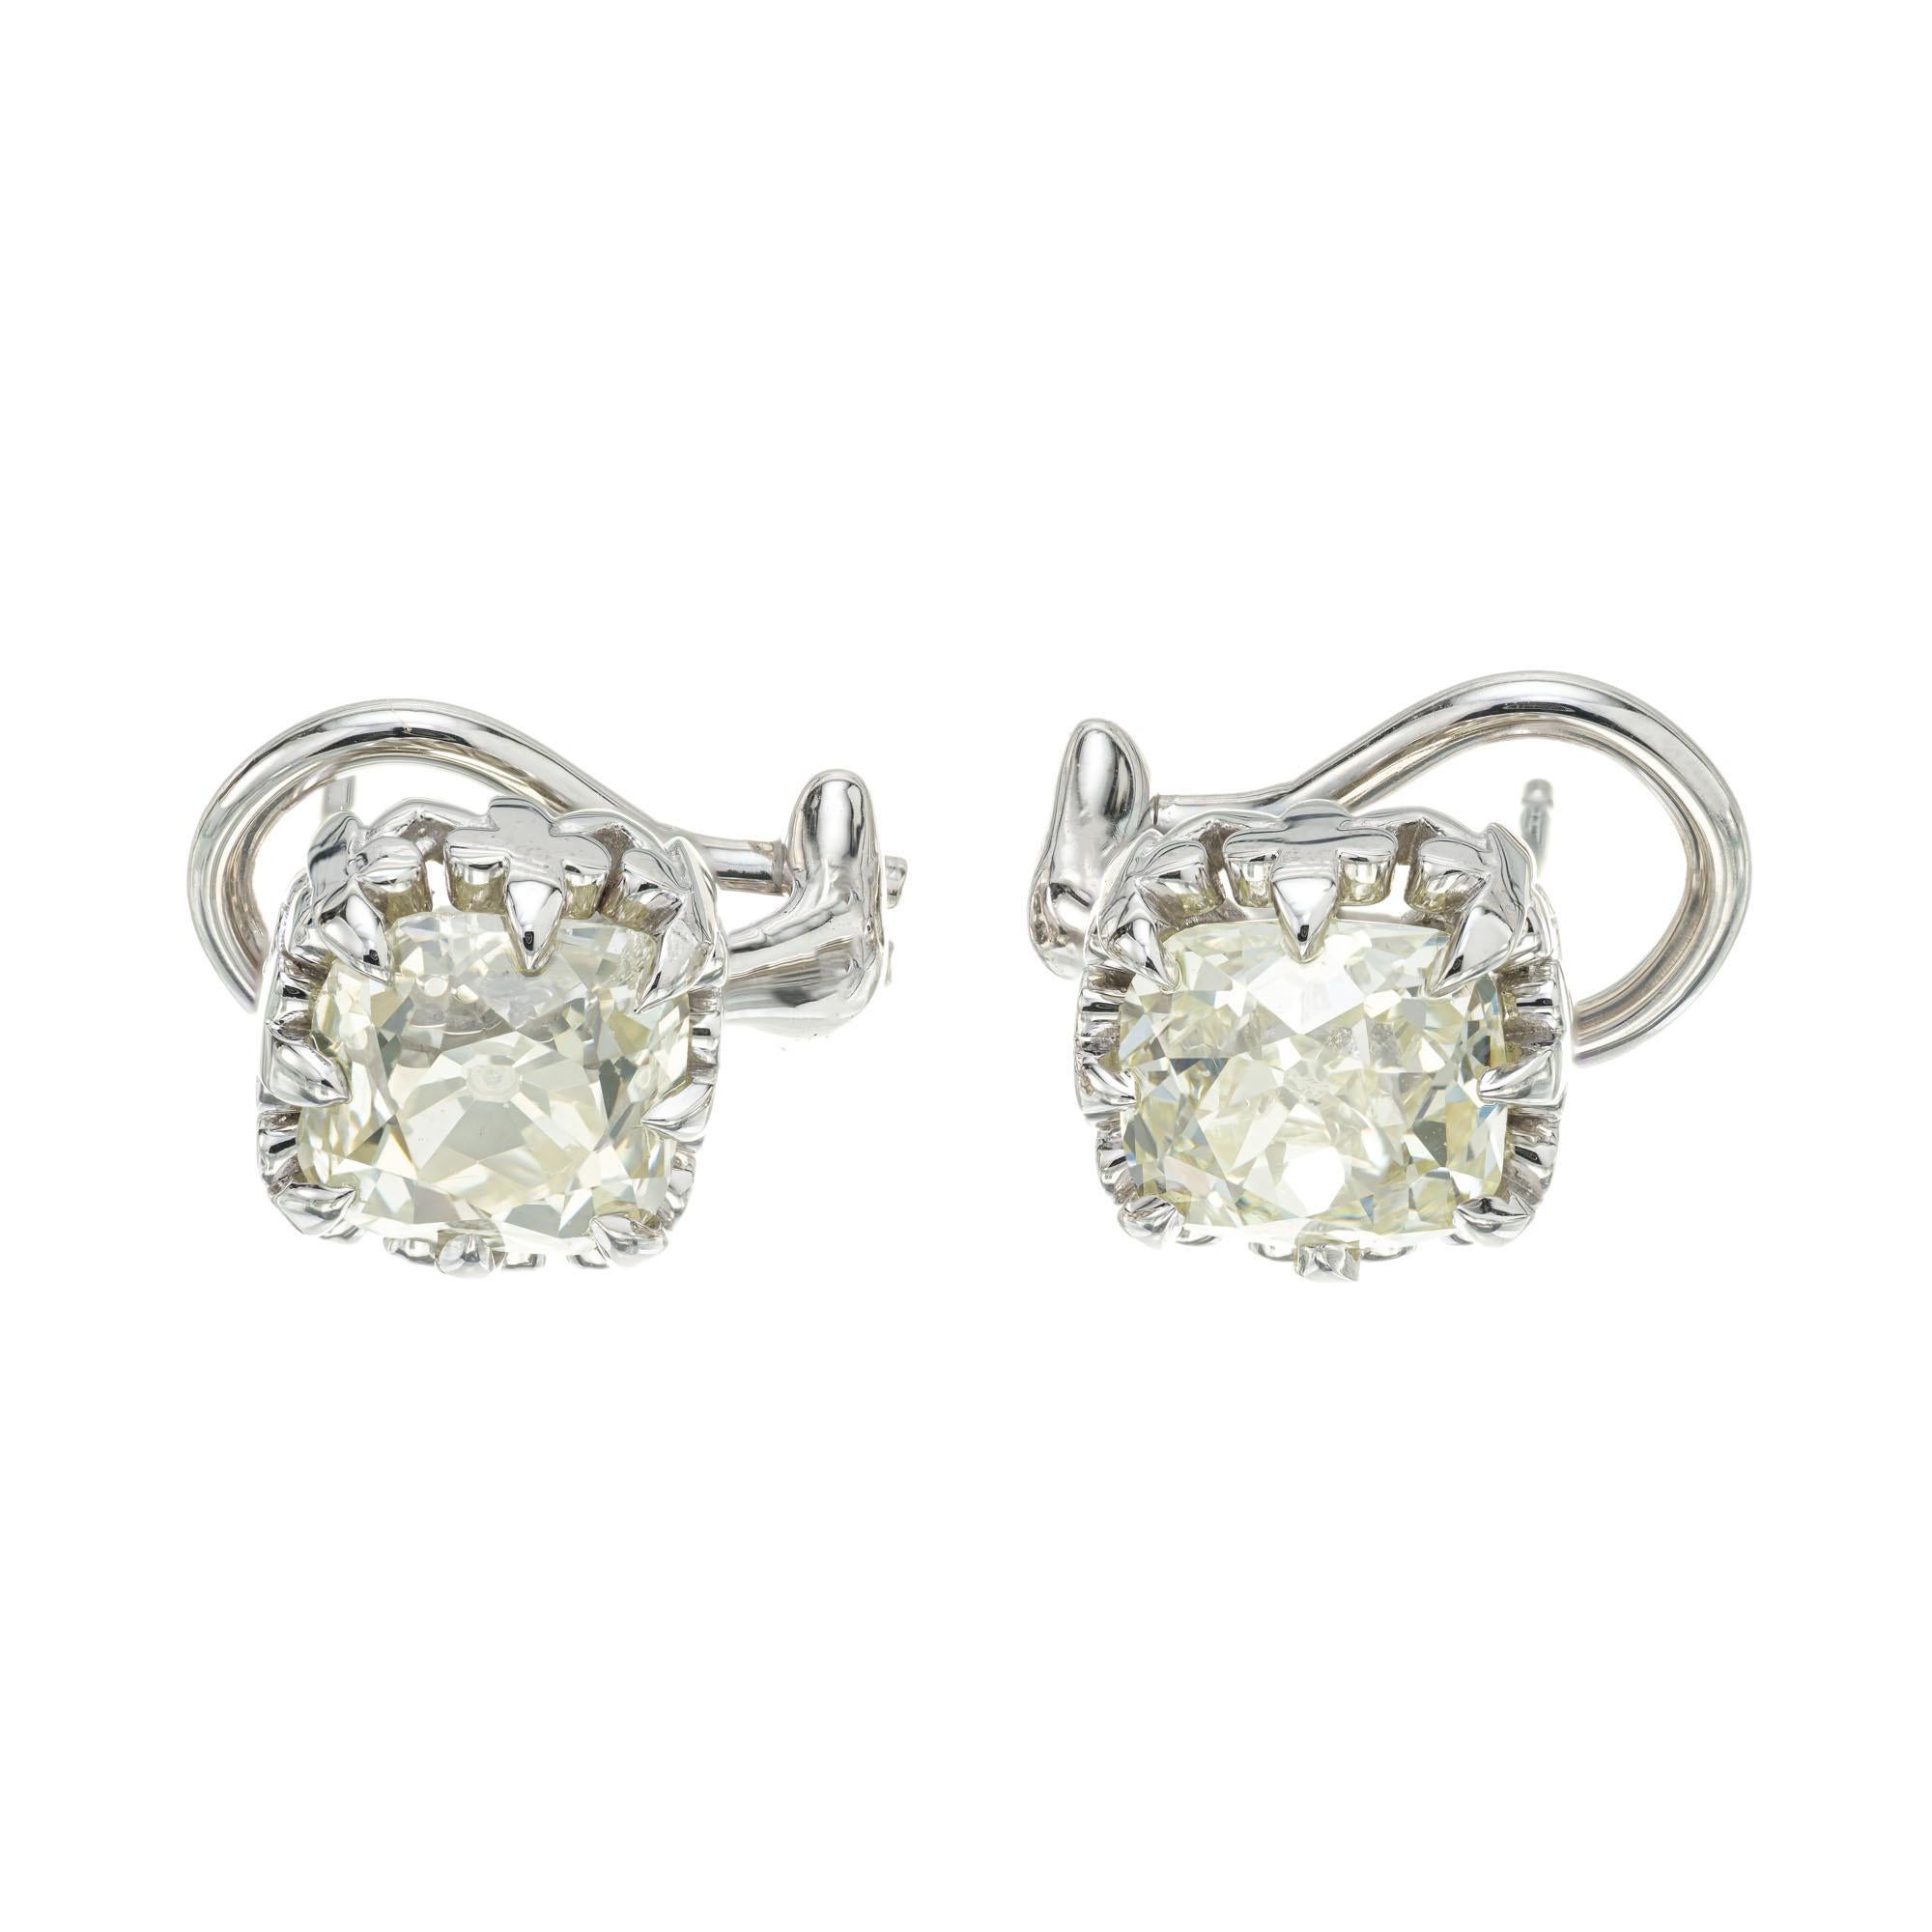 Peter Suchy EGL Certified 3.10 Carat Diamond Platinum Stud Earrings In New Condition For Sale In Stamford, CT